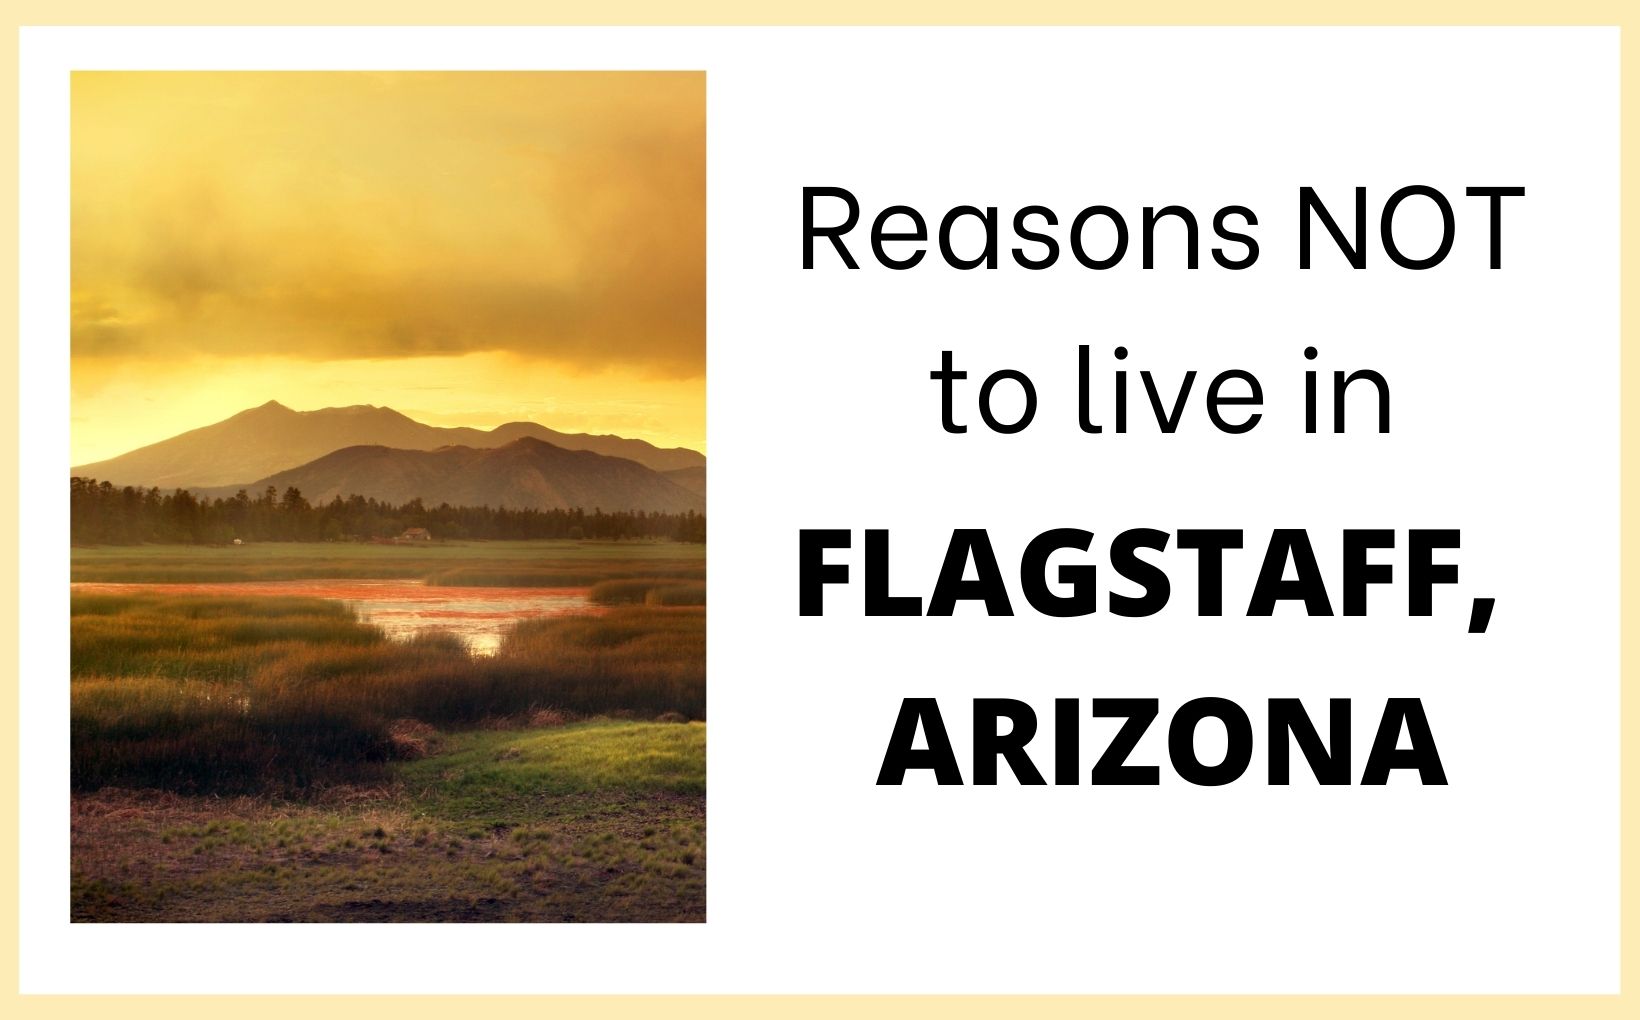 Reasons NOT to live in Flagstaff feature image